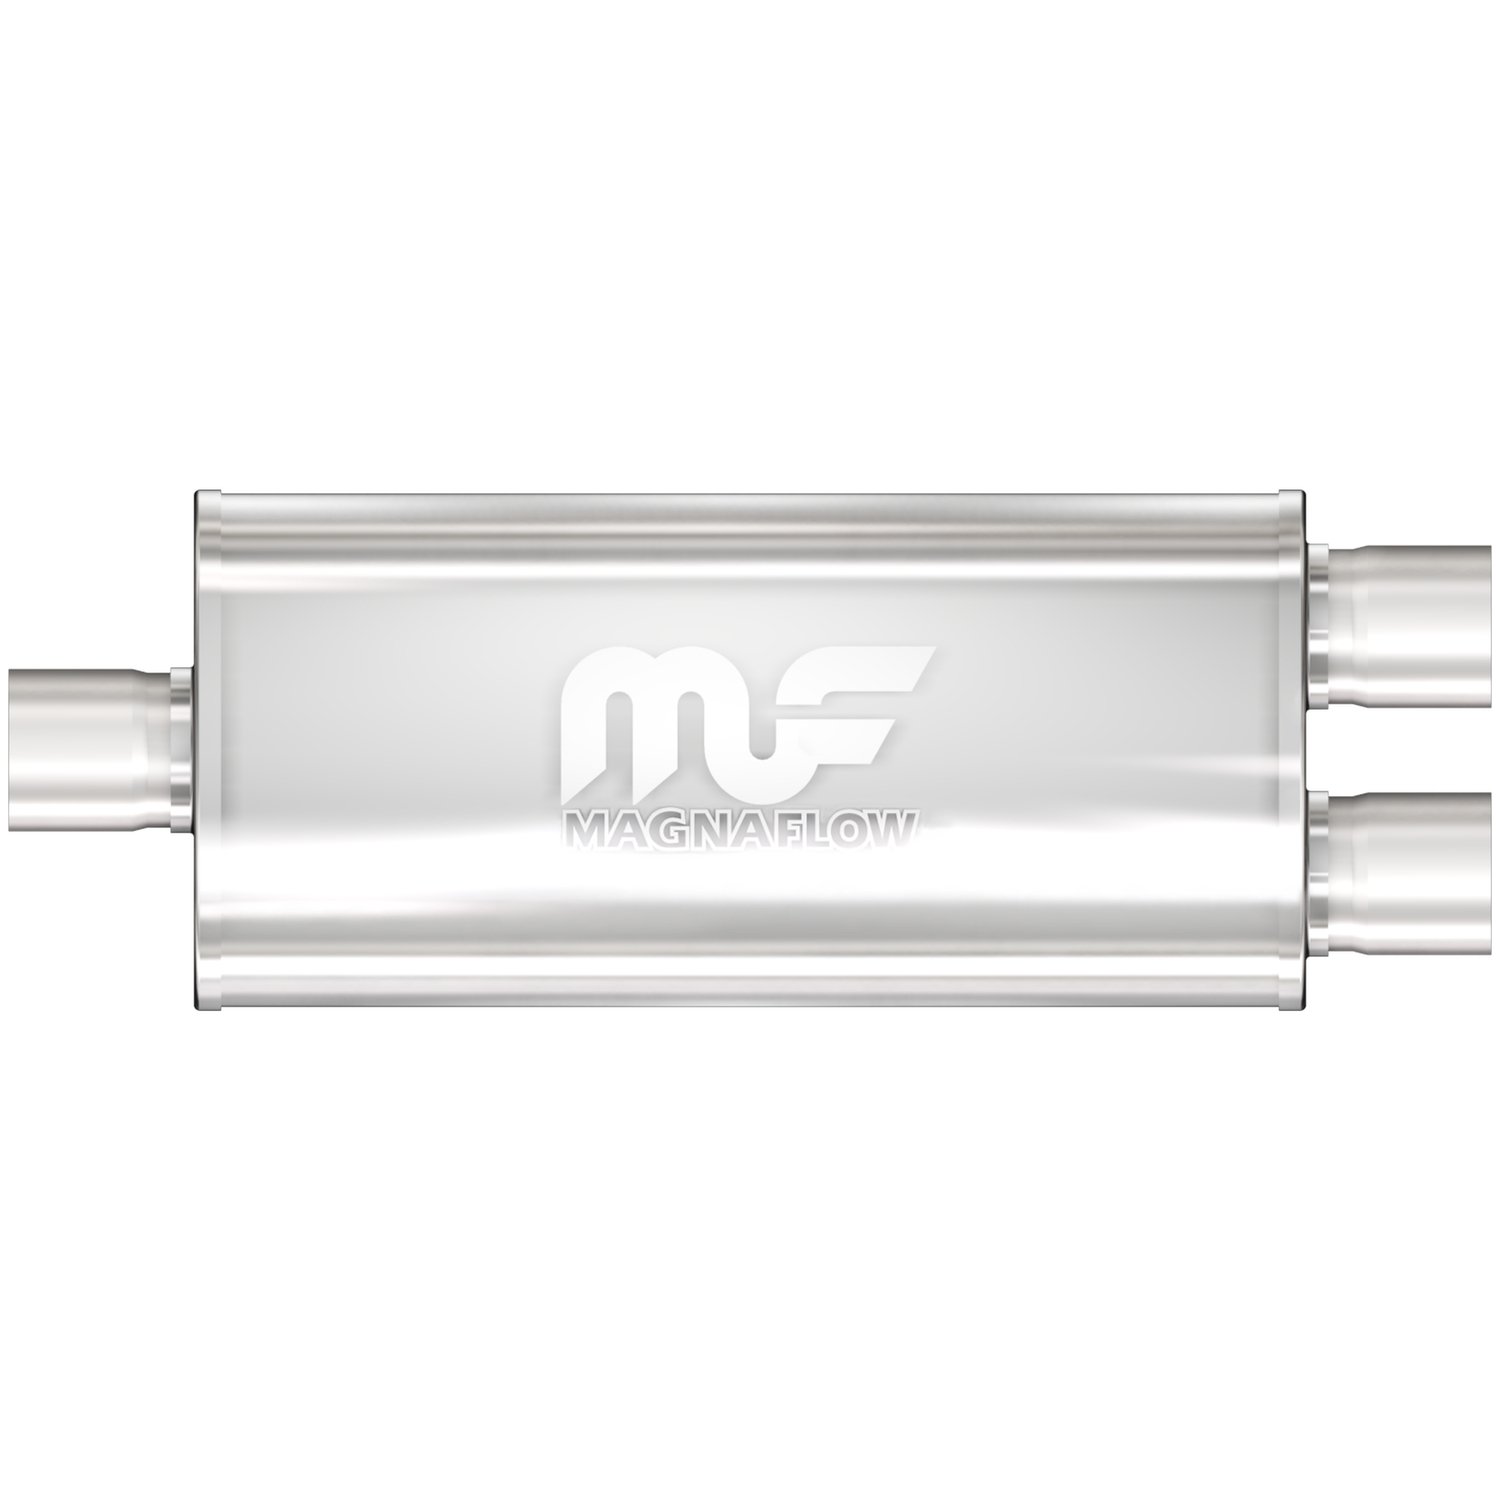 5" x 8" Oval Muffler Center In/Dual Out: 2"/2" Body Length: 14" Overall Length: 20" Core Size: 2.5" Satin Finish